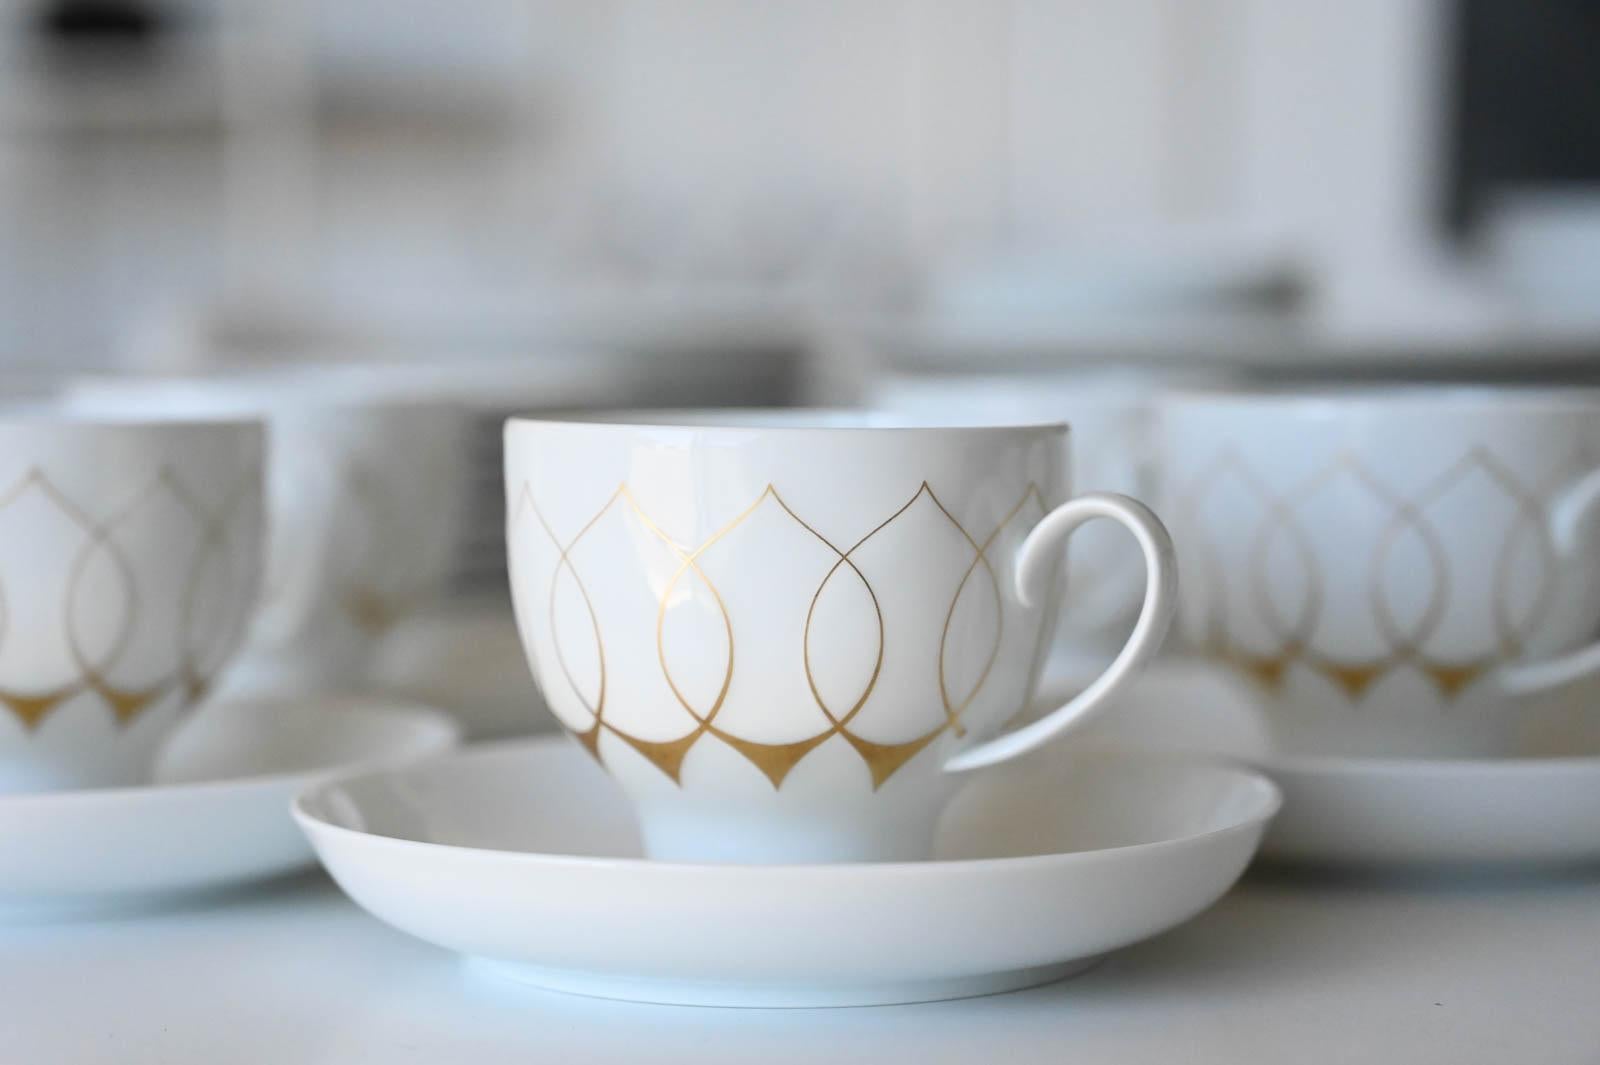 Porcelain Bjorn Wiinblad for Rosenthal Gold Lotus Silhouette Tableware, Service for 8 For Sale